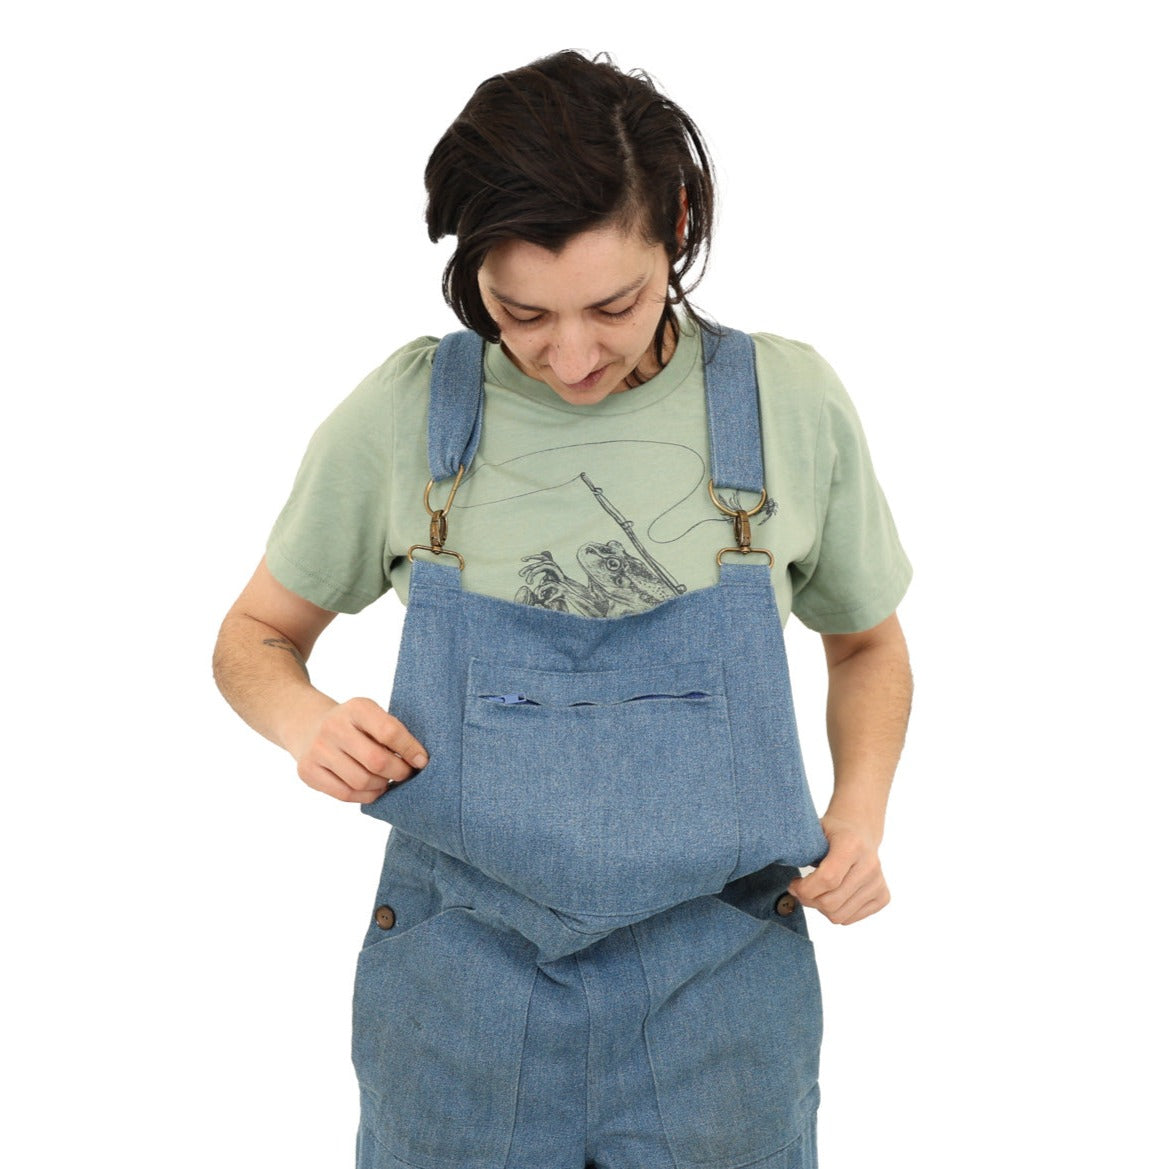 Woman in overalls wearing a green shirt with print of a frog riding a scooter with a fly fishing rod, net, polaroid camera